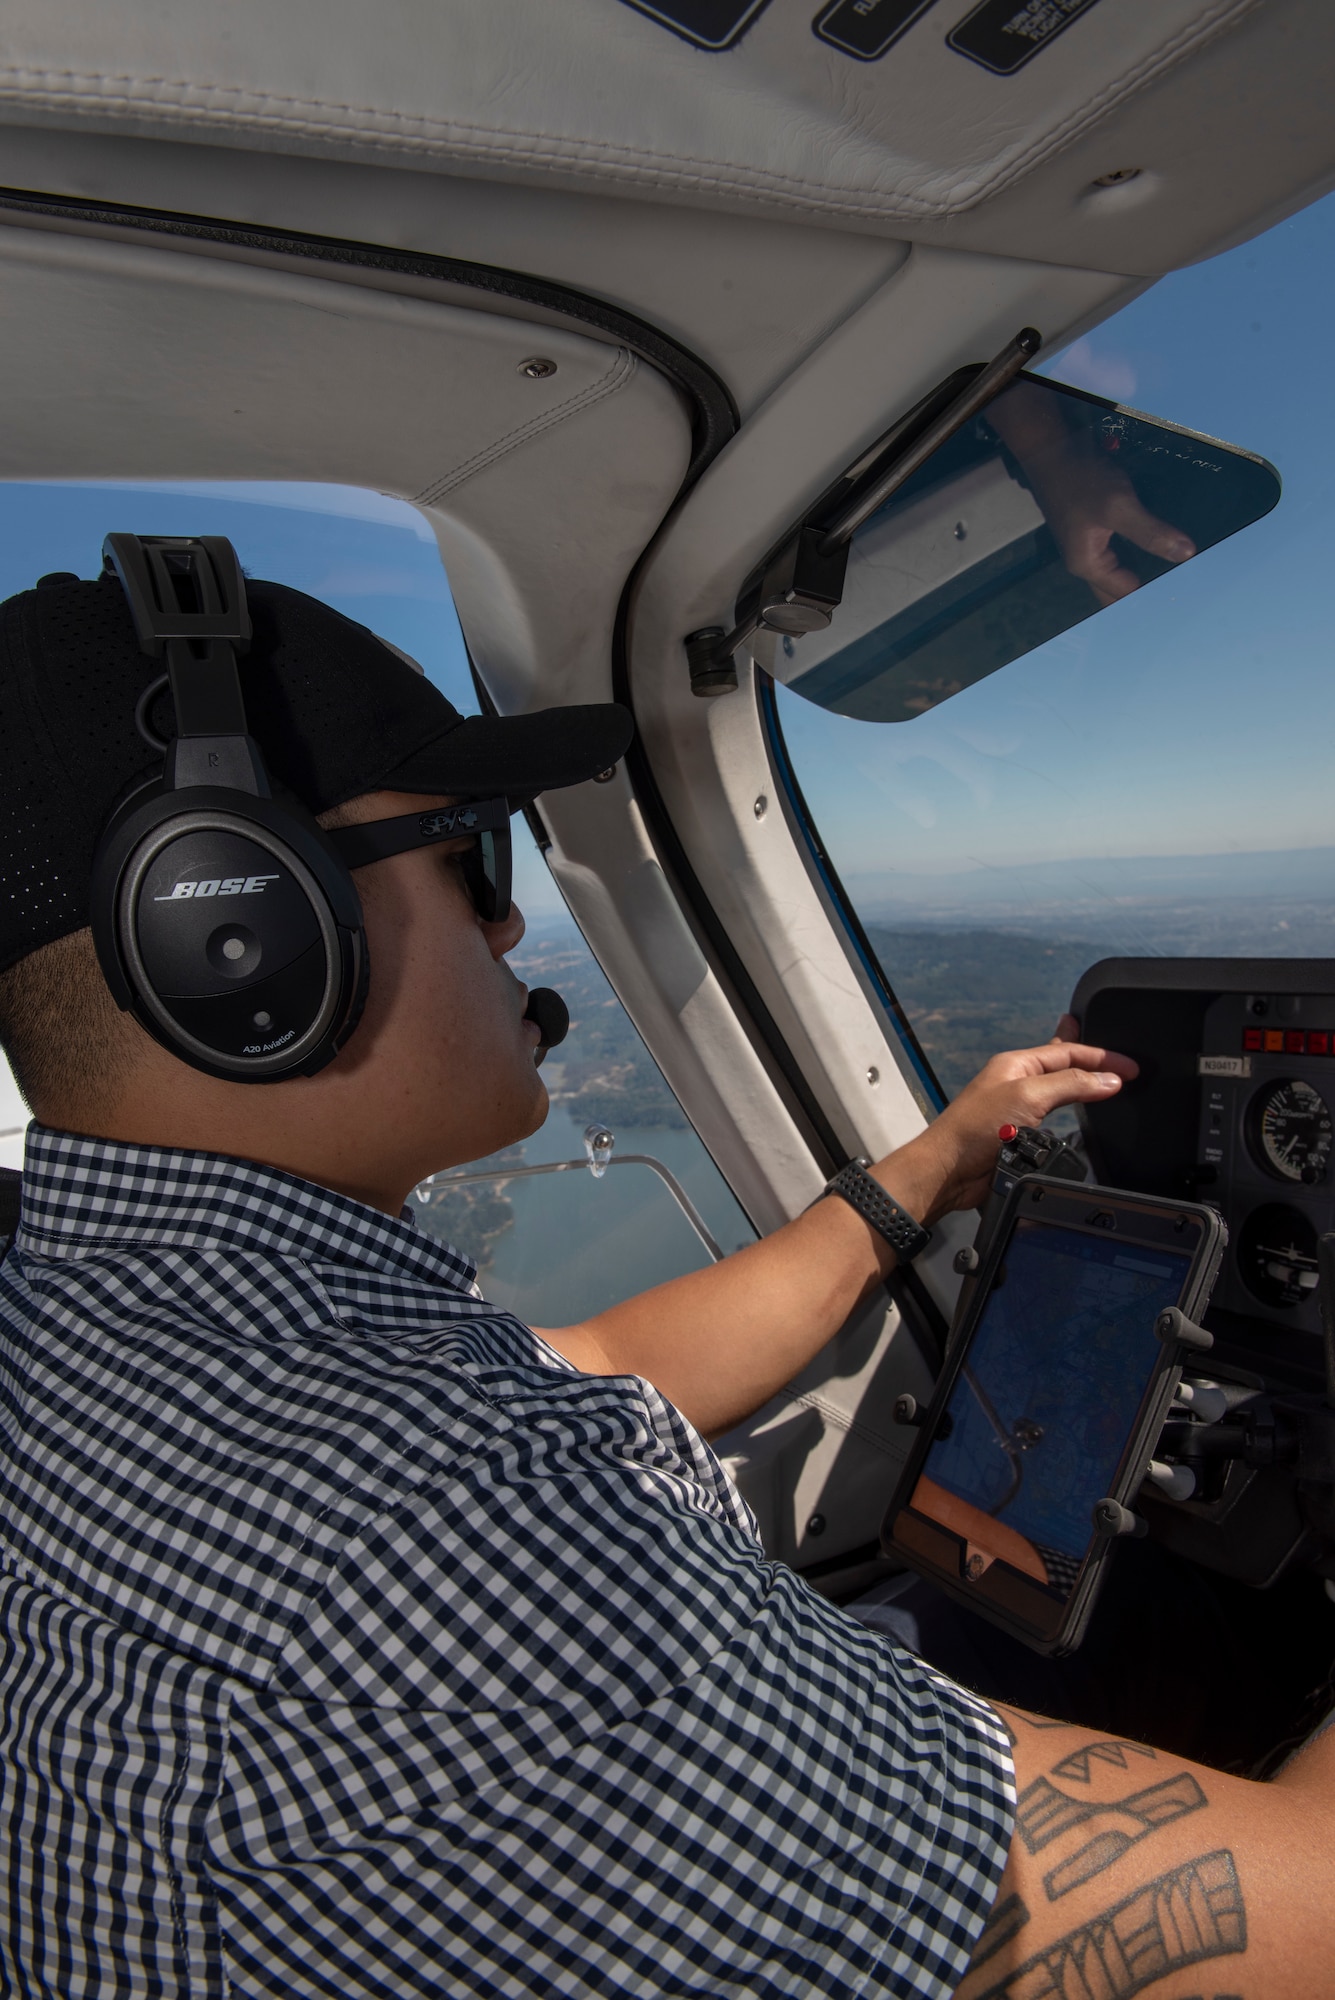 U.S. Air Force Tech. Sgt. Ron, 860th Aircraft Maintenance Squadron flight line expediter, mans the controls of a Socata Trinidad TB-20 July 27, 2019, during a flight over the San Francisco Bay Area. Ron has accumulated more than 250 flying hours and completed Air Force remote pilot aircraft training July 12. (U.S. Air Force photo by Tech. Sgt. James Hodgman)